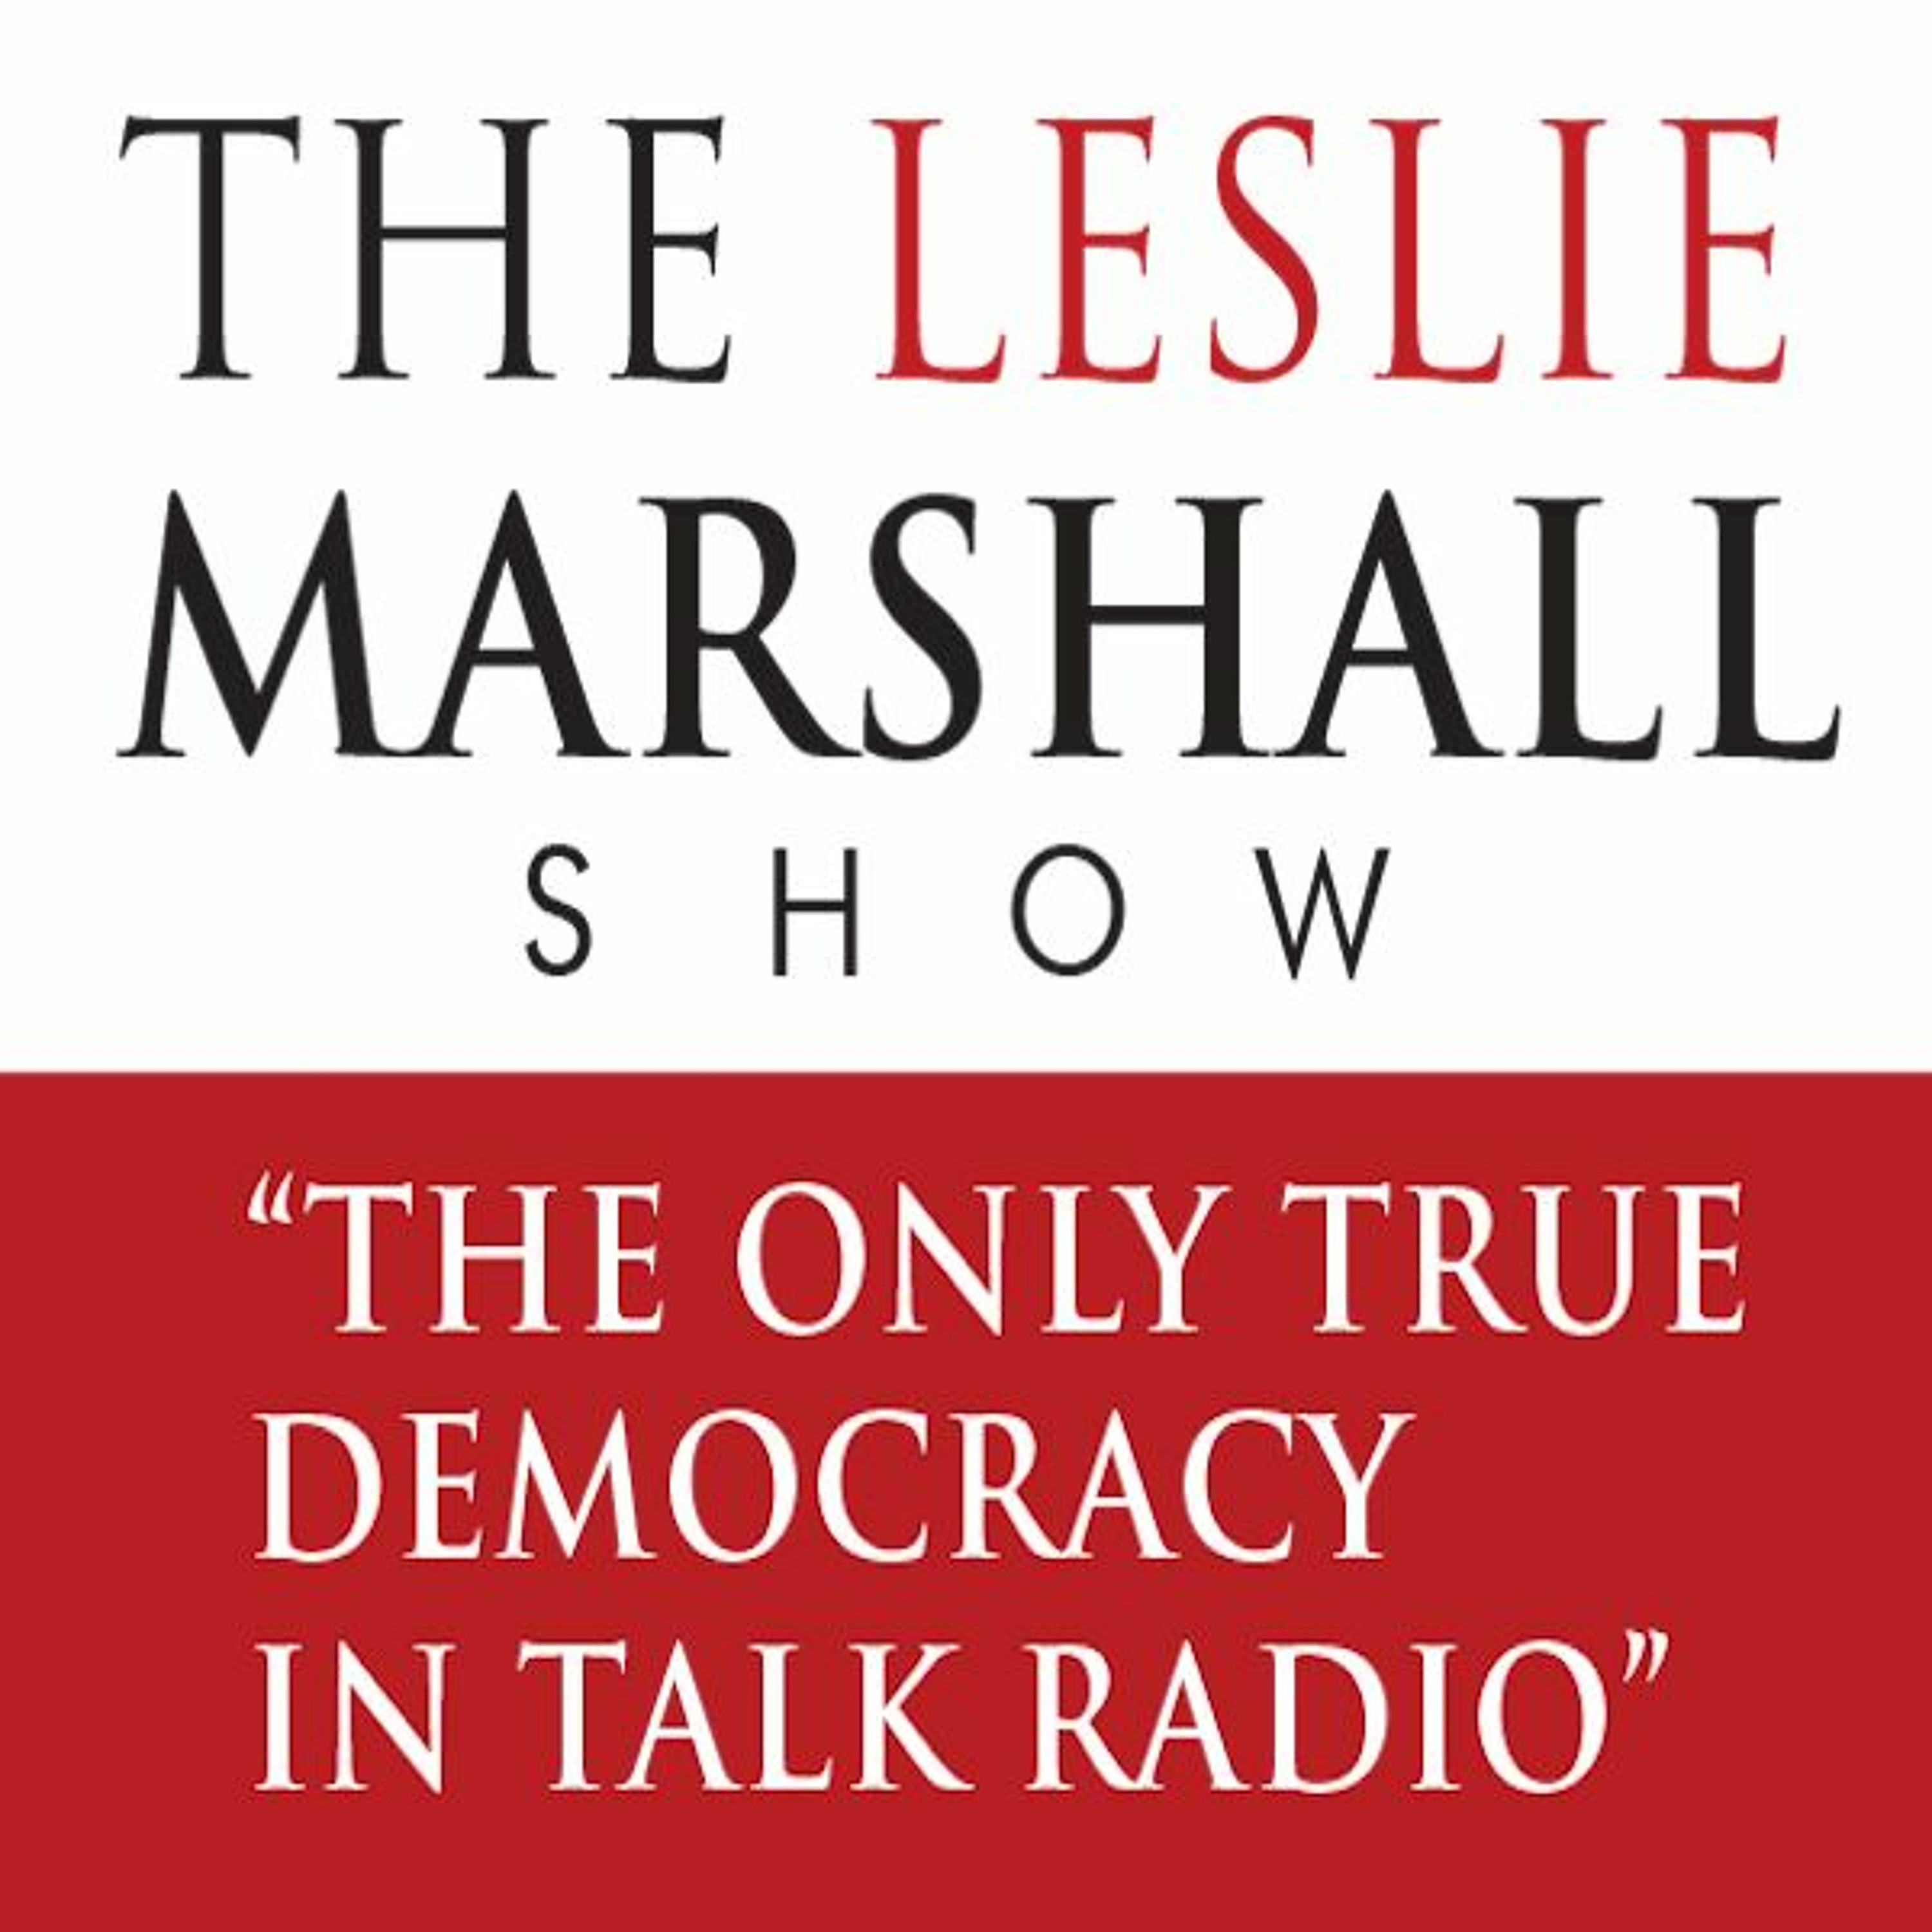 Leslie Marshall Show - Trump GOP Nomination A Done Deal?; Corporate News Coverage Problems